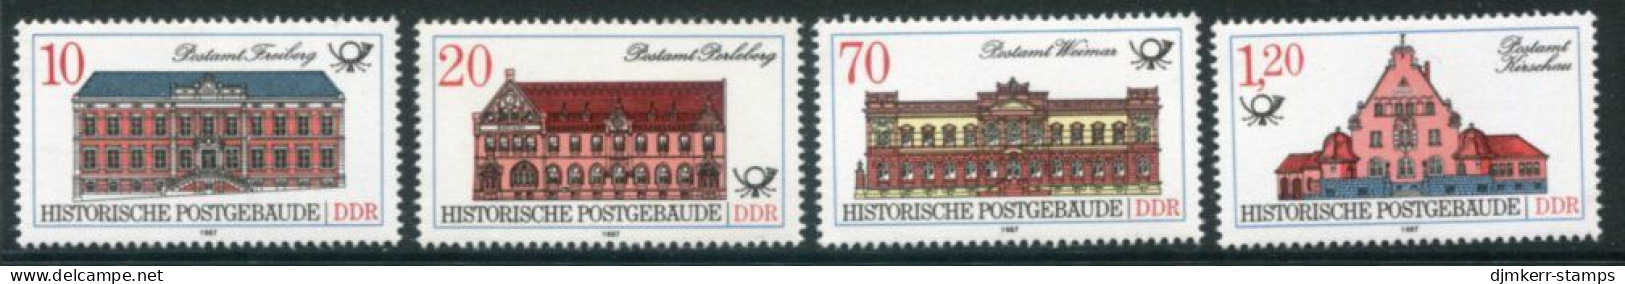 DDR 1987 Historic Postal Buildings Singles MNH / **.  Michel 3067-70 - Unused Stamps